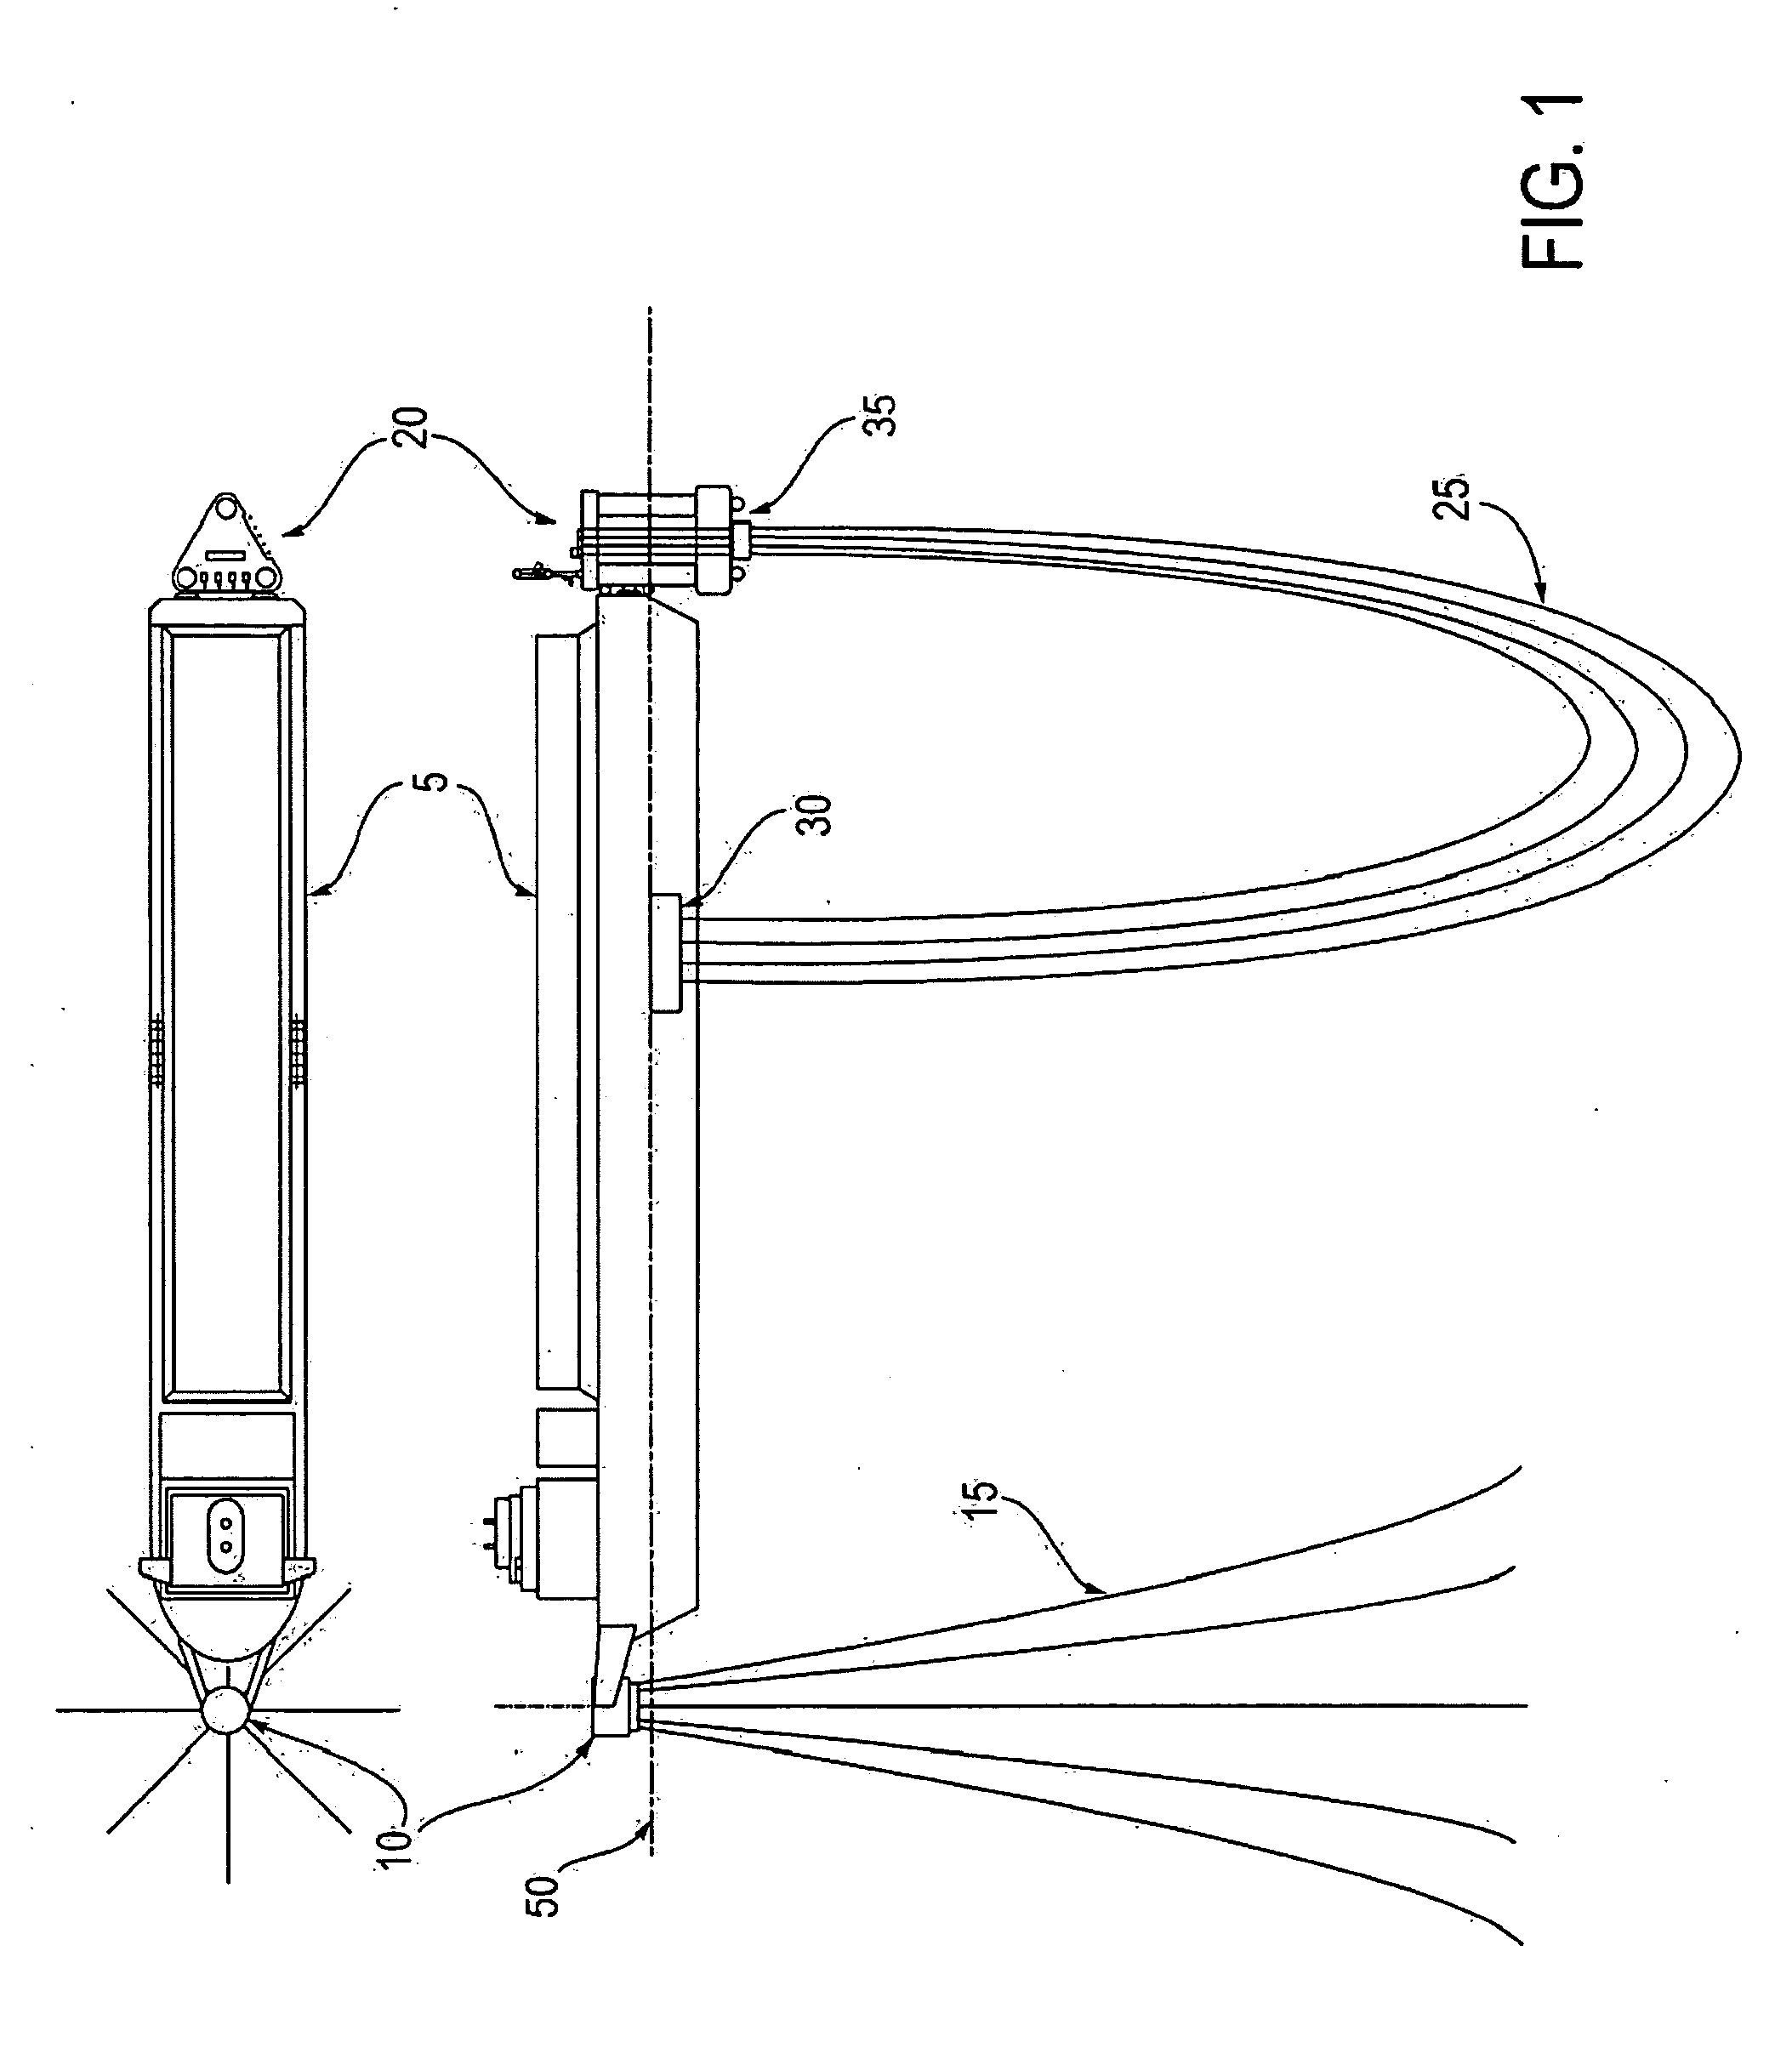 System for transferring fluids between floating vessels using flexible conduit and releasable mooring system